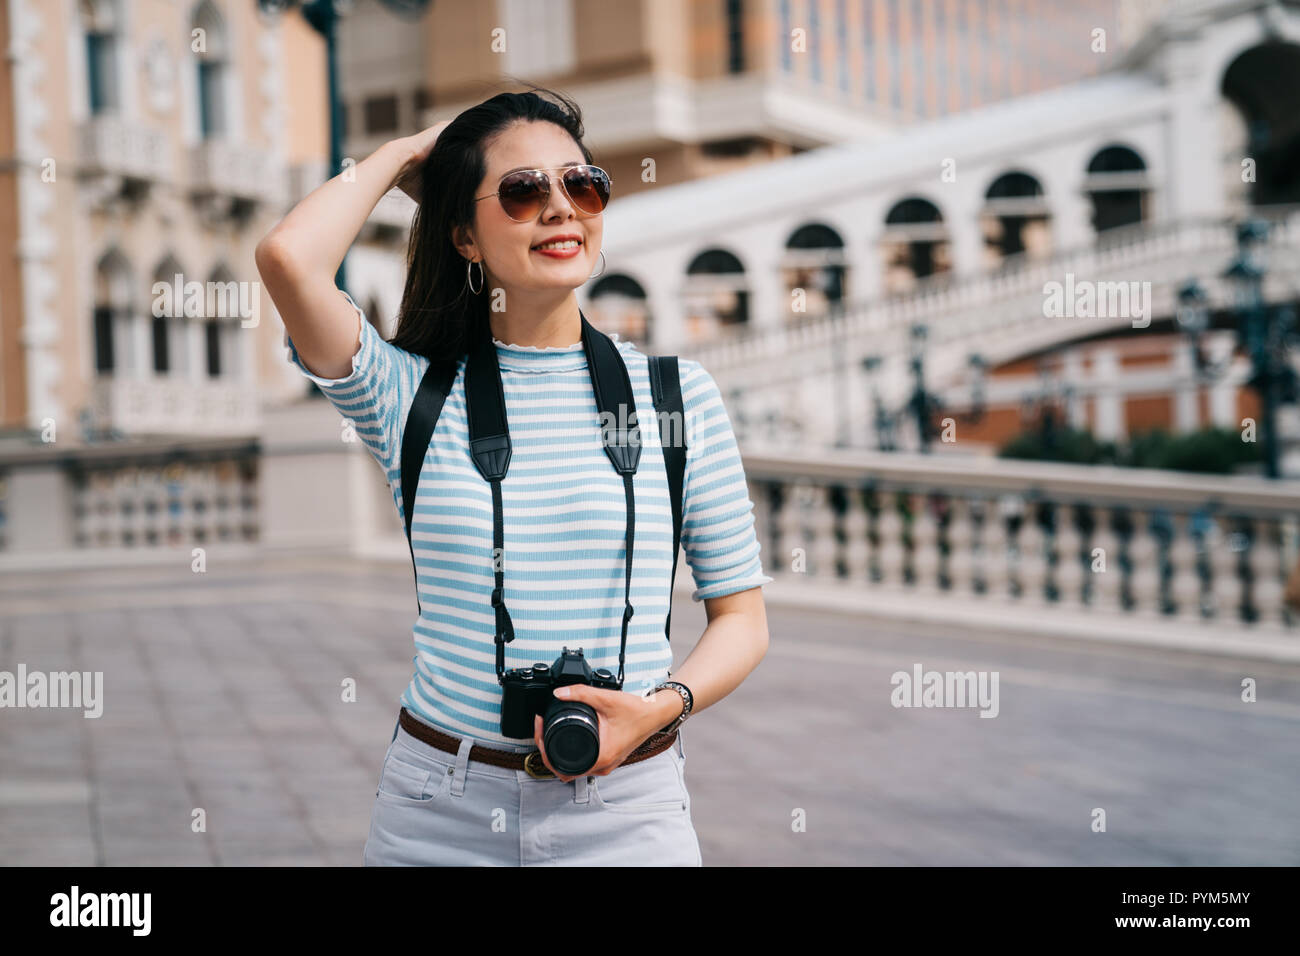 wind blowing the beautiful traveler's long hair while she joyfully walking on the bridge. Japanese lady tourist having holiday in America. Asian woman Stock Photo